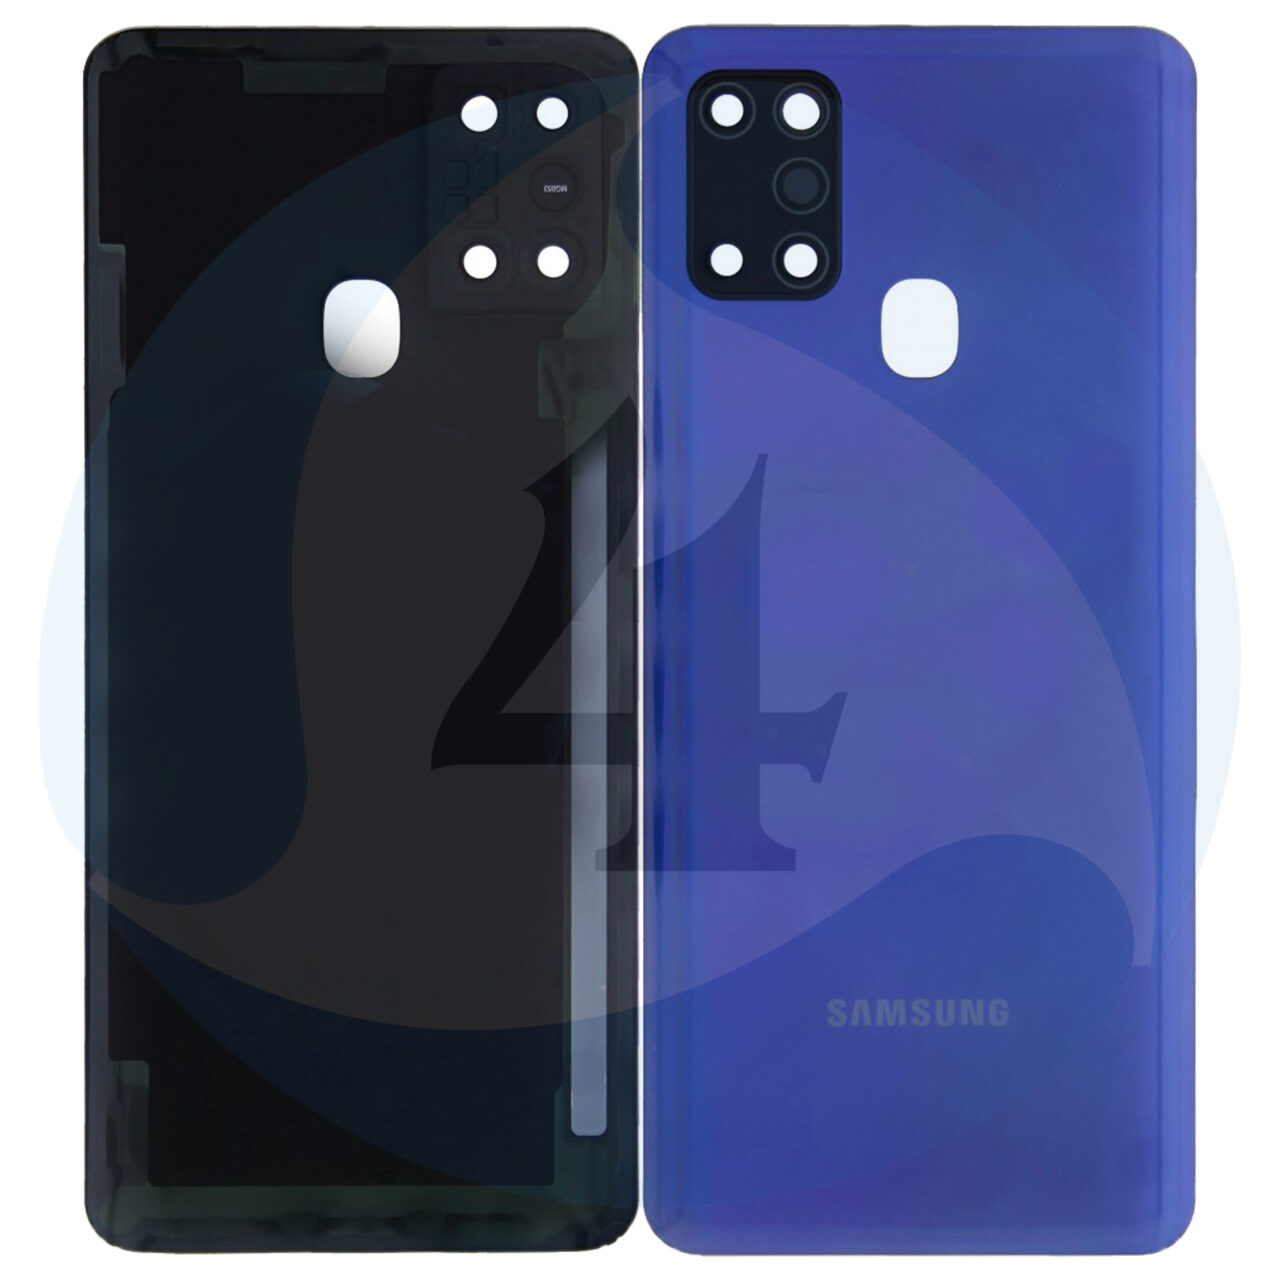 Samsung Galaxy A21s SM A217 F DS Battery Cover Blue